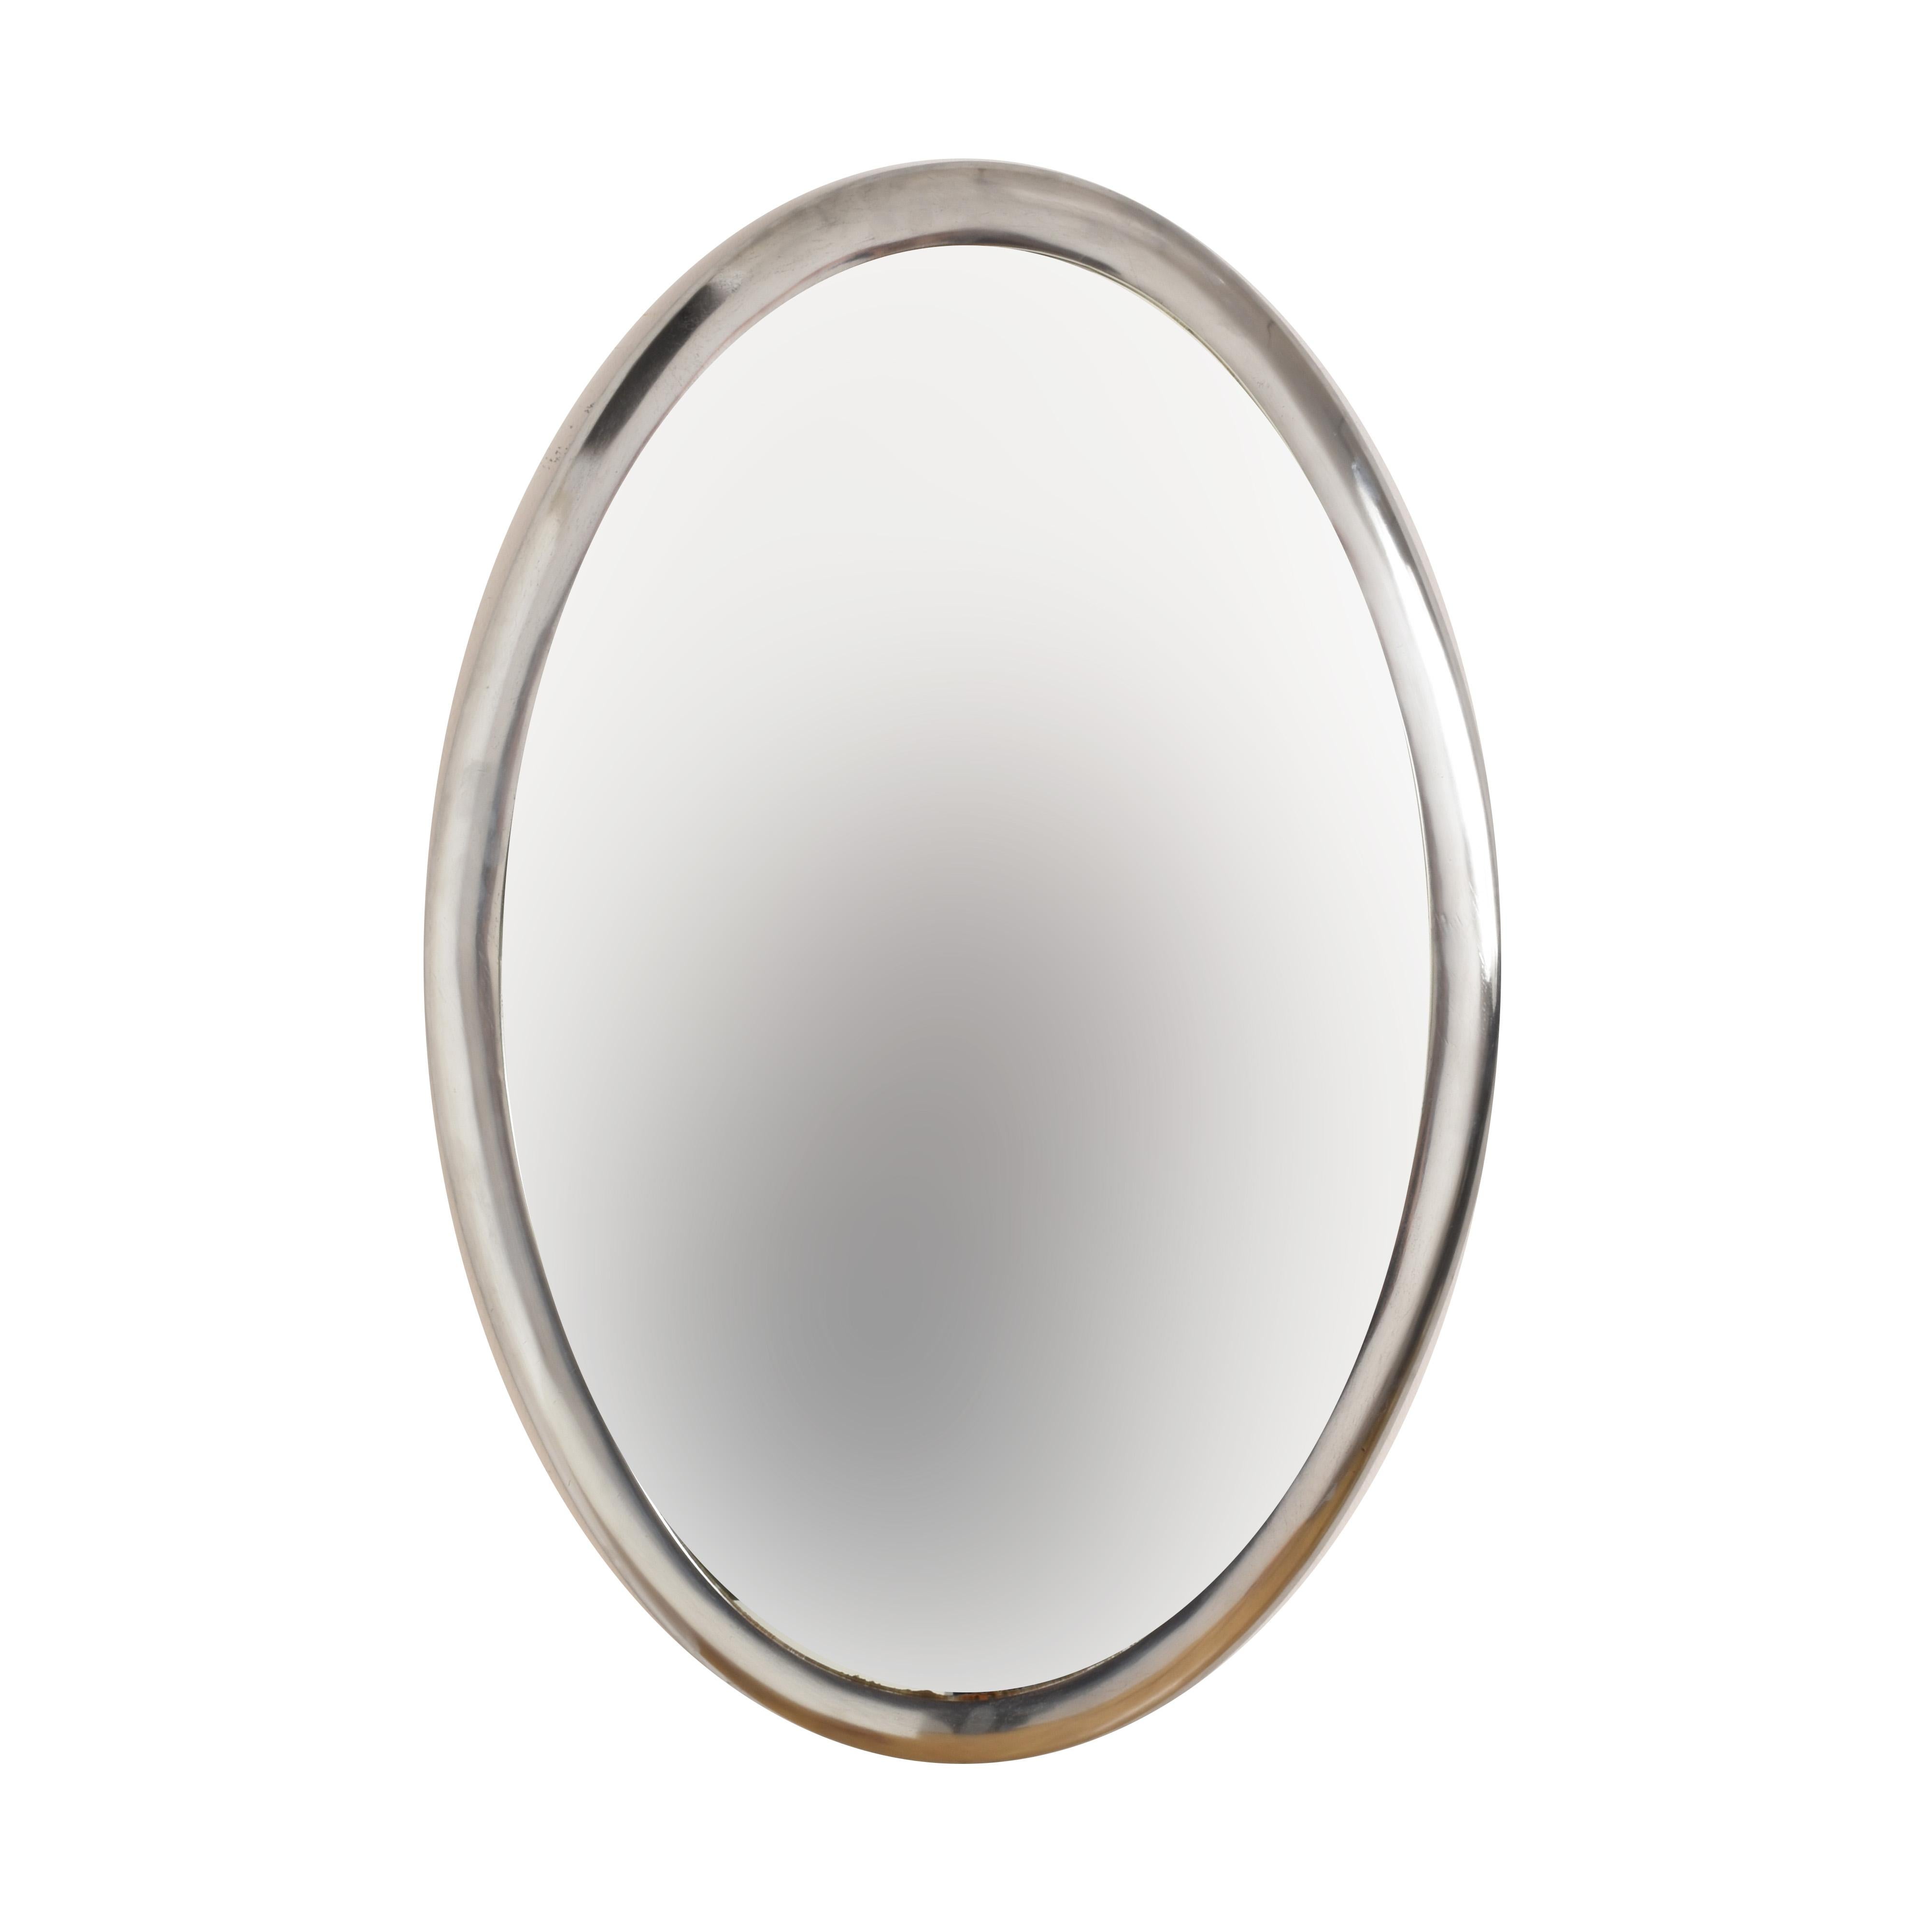 Steel Oval Wall Mirror with Metal Frame, Italy, 1970s